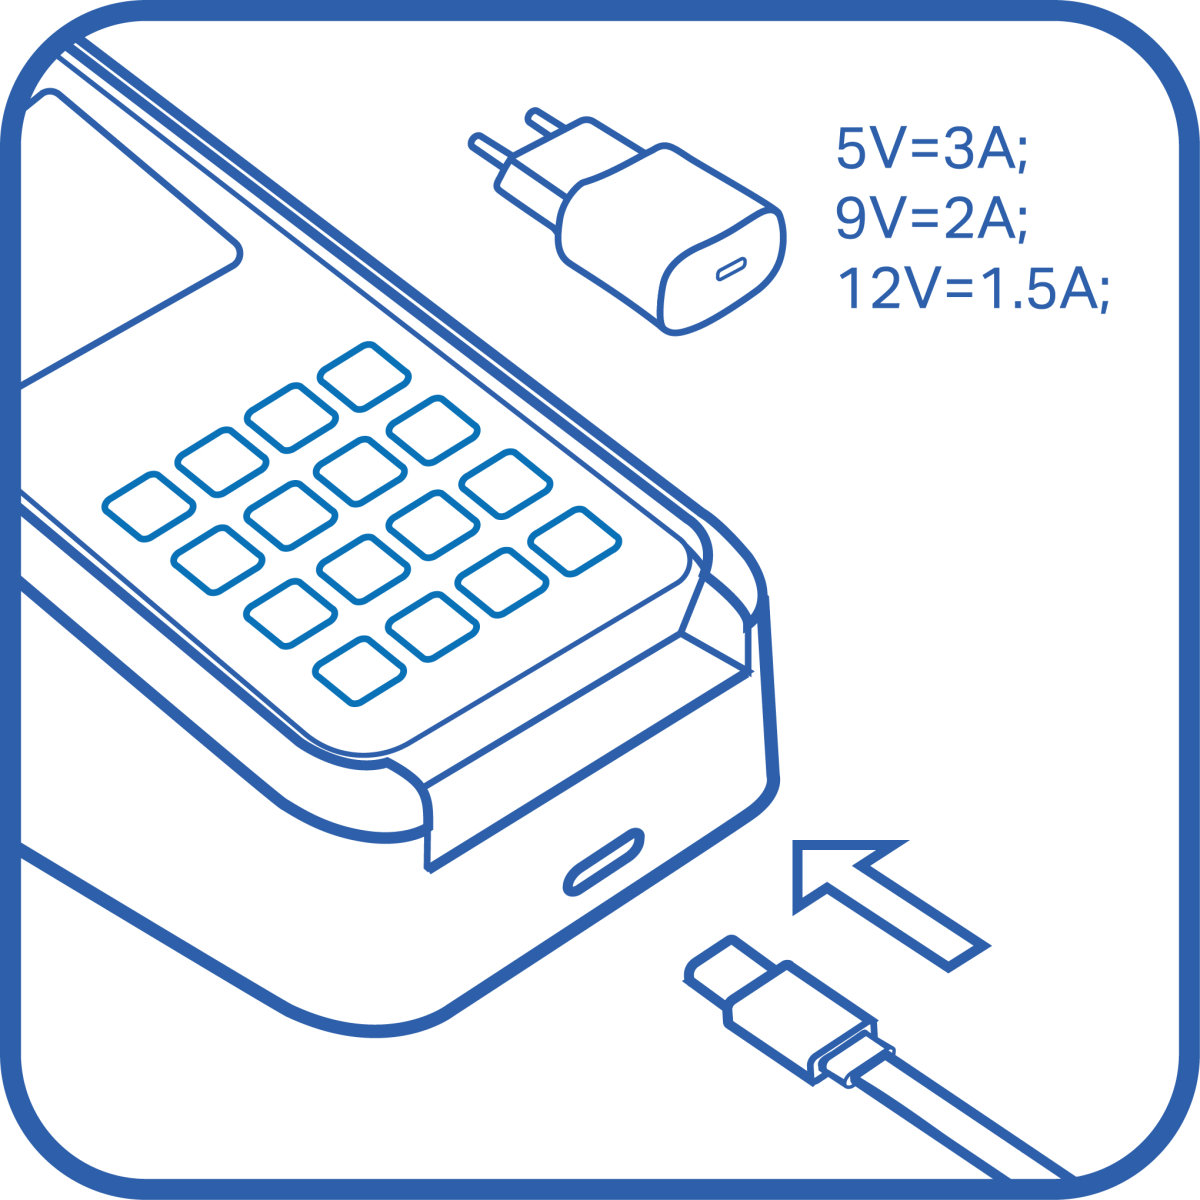 icon of a 3d cradle being plugged in via usb